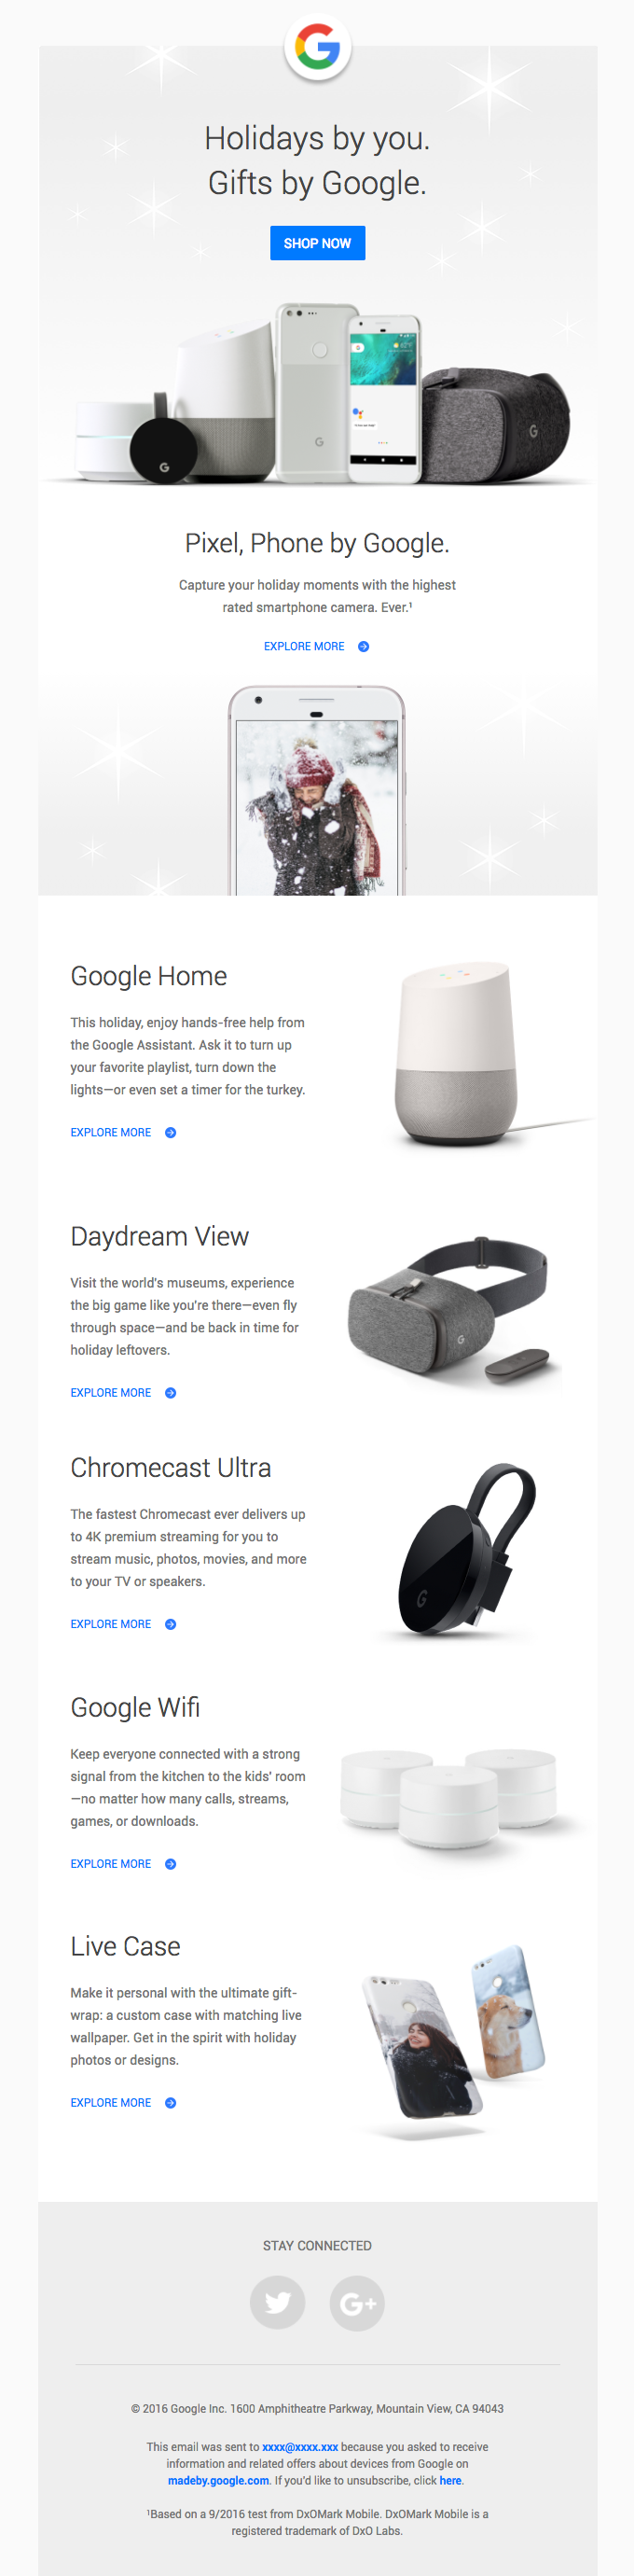 Give the gift of Google: Pixel, Daydream View, Google Home